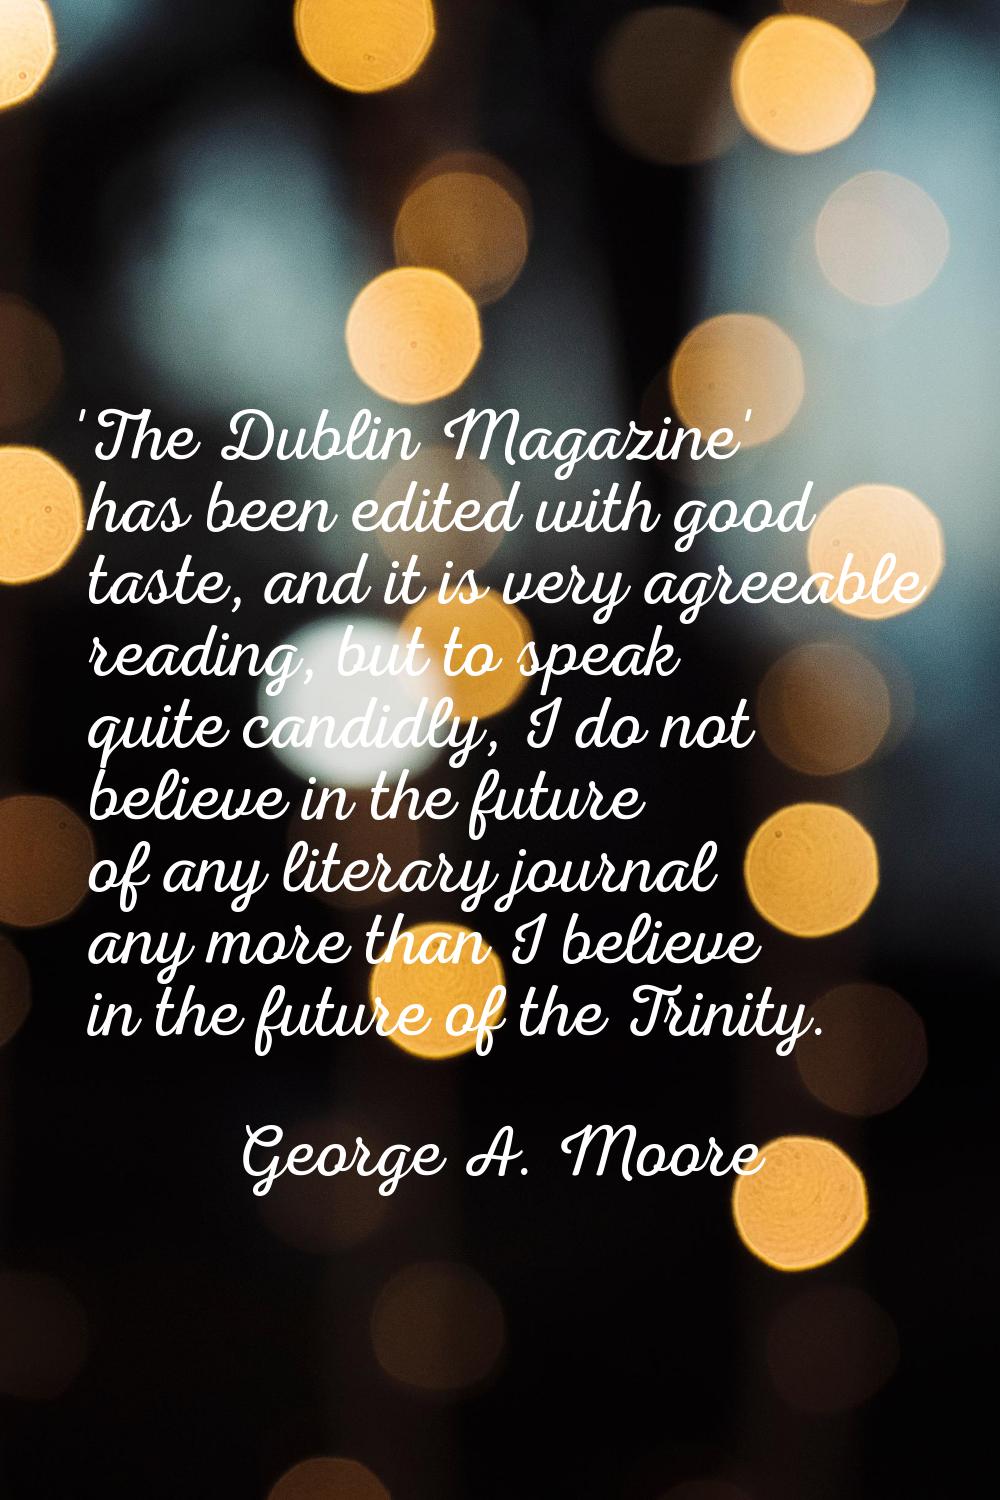 'The Dublin Magazine' has been edited with good taste, and it is very agreeable reading, but to spe